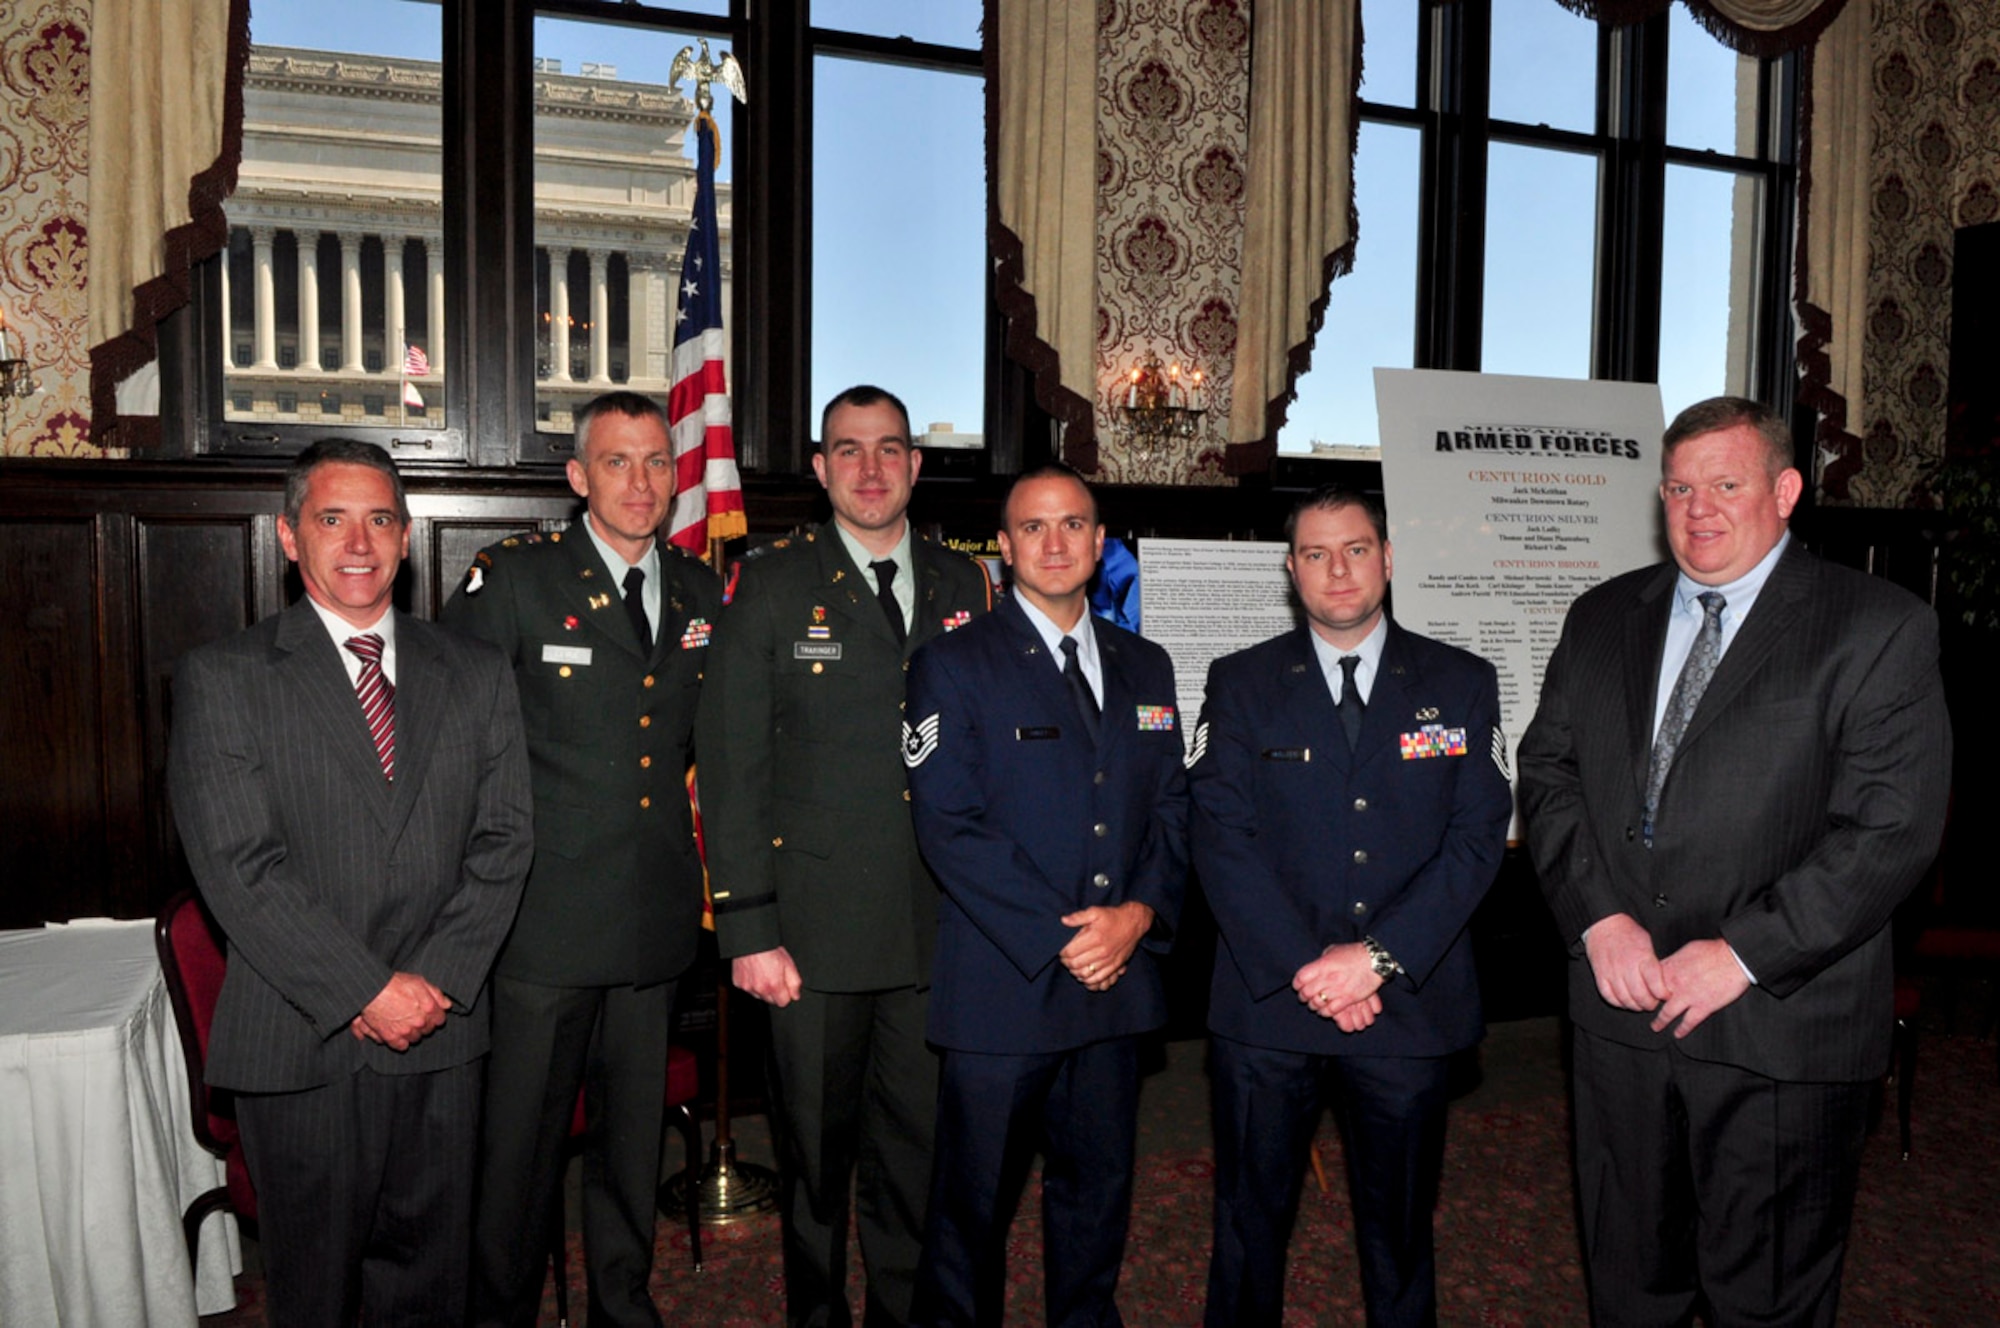 Service members and employers were in attendance for the ESGR breakfast held at the Wisconsin Club in downtown Milwaukee, May 16, 2011.  Each year the Milwaukee Armed Forces Committee and Wisconsin Committee for Employer Support of the Guard and Reserve (ESGR) recognize the men and women who serve the armed forces and the employers that support them. U.S. Air Force photo by Tech Sgt. Thomas J Sobczyk  / Released